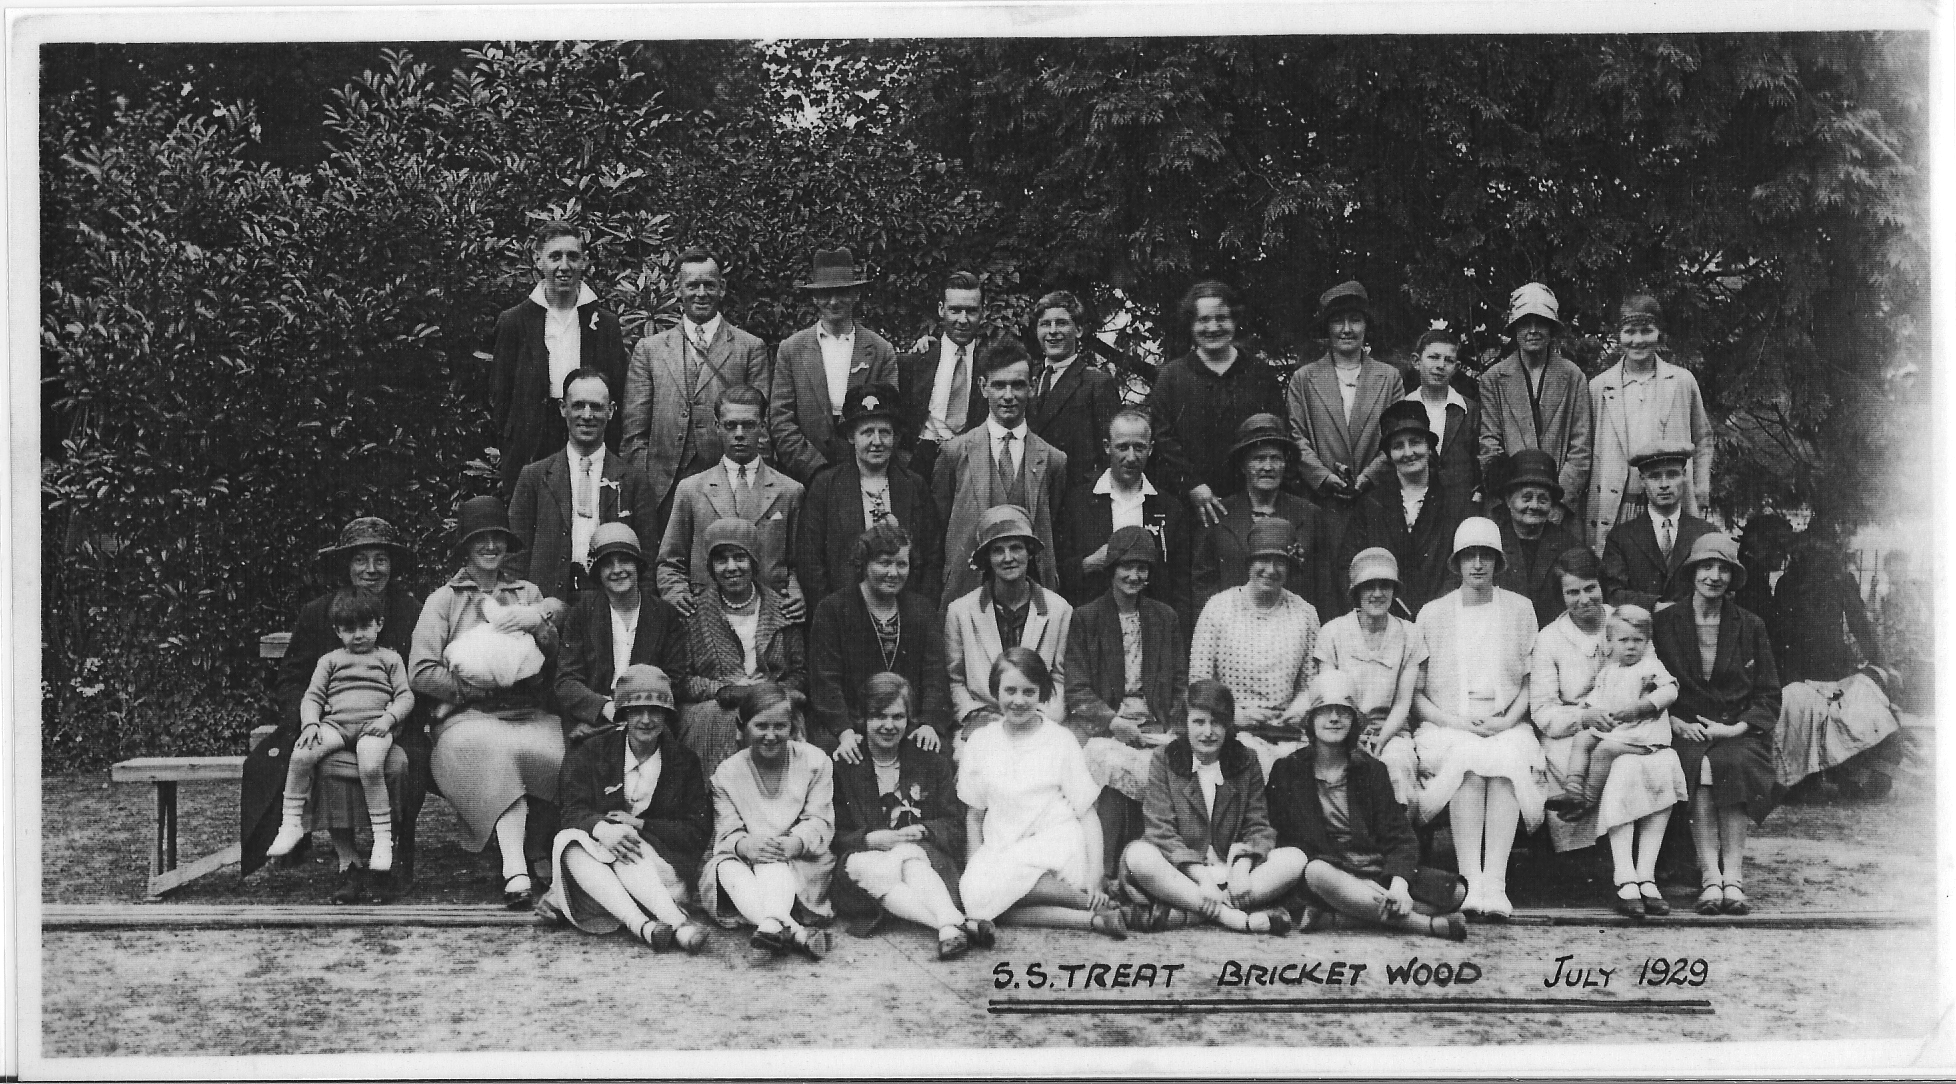 Sunday School Treat, Bricket Wood, July 1929, Rose (Horwood) Gurney, front second from right with Roy?